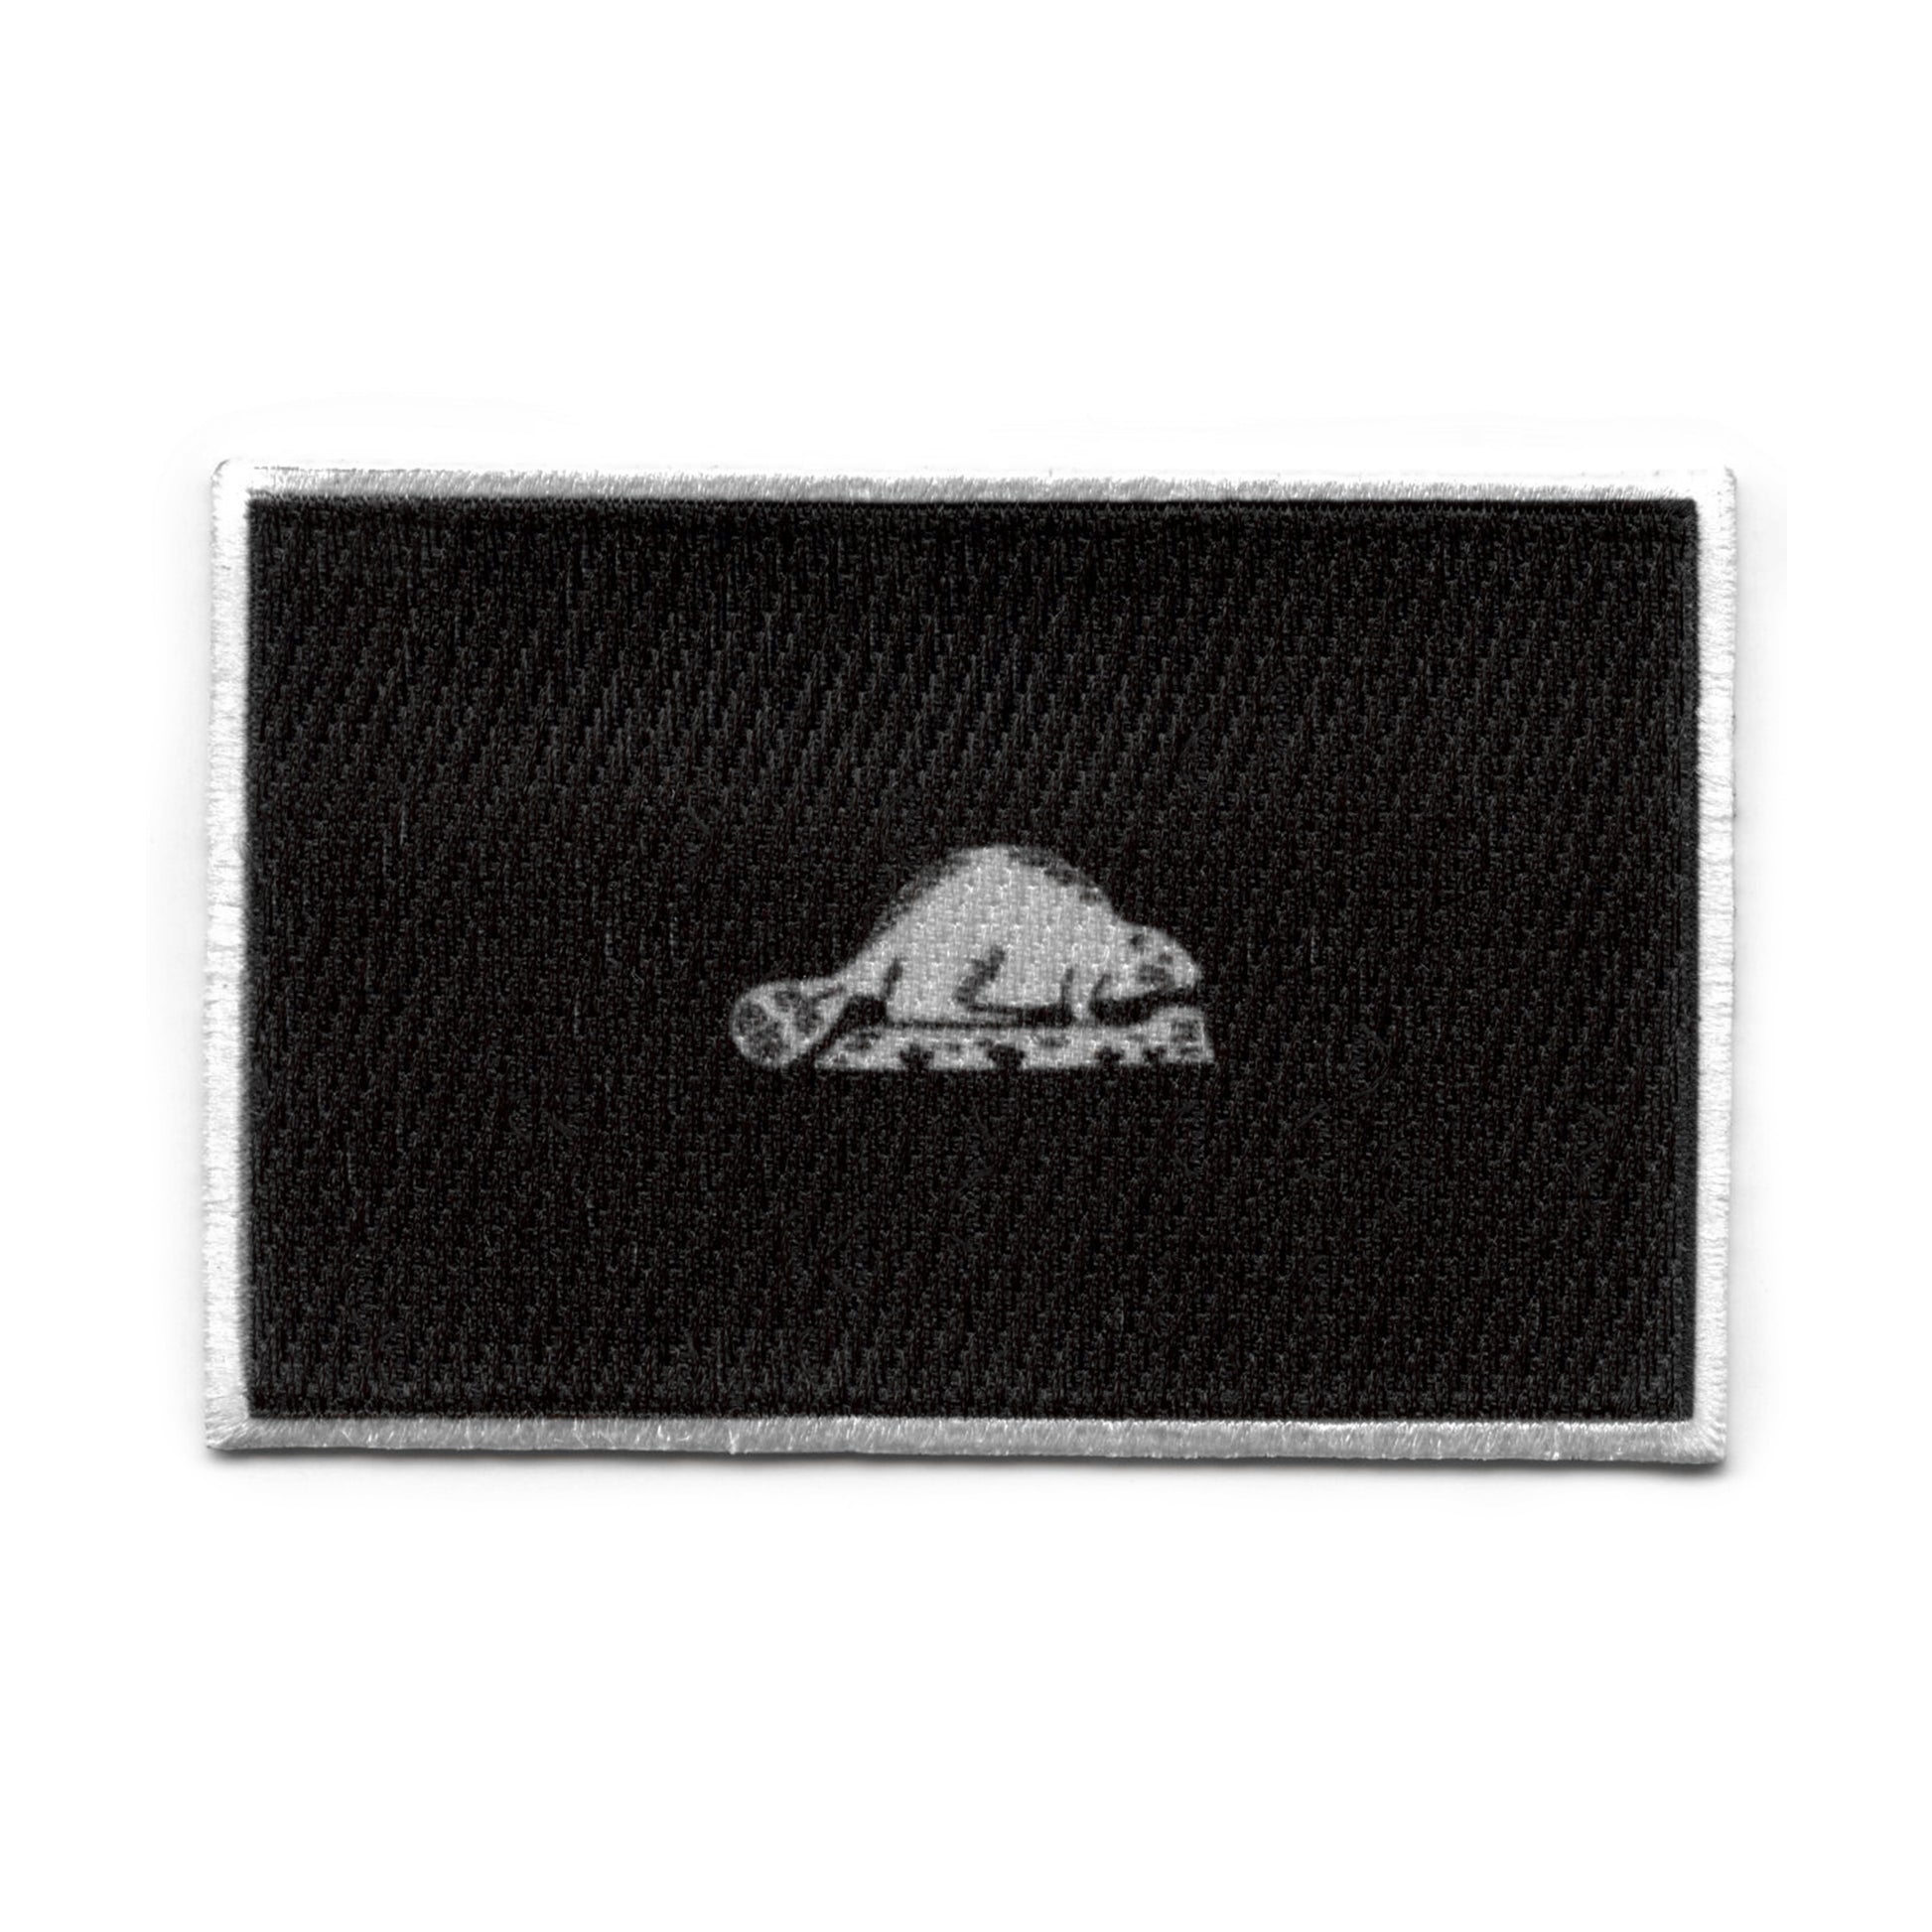 Oregon State Flag Patch Grayscale Back Embroidered Iron On 